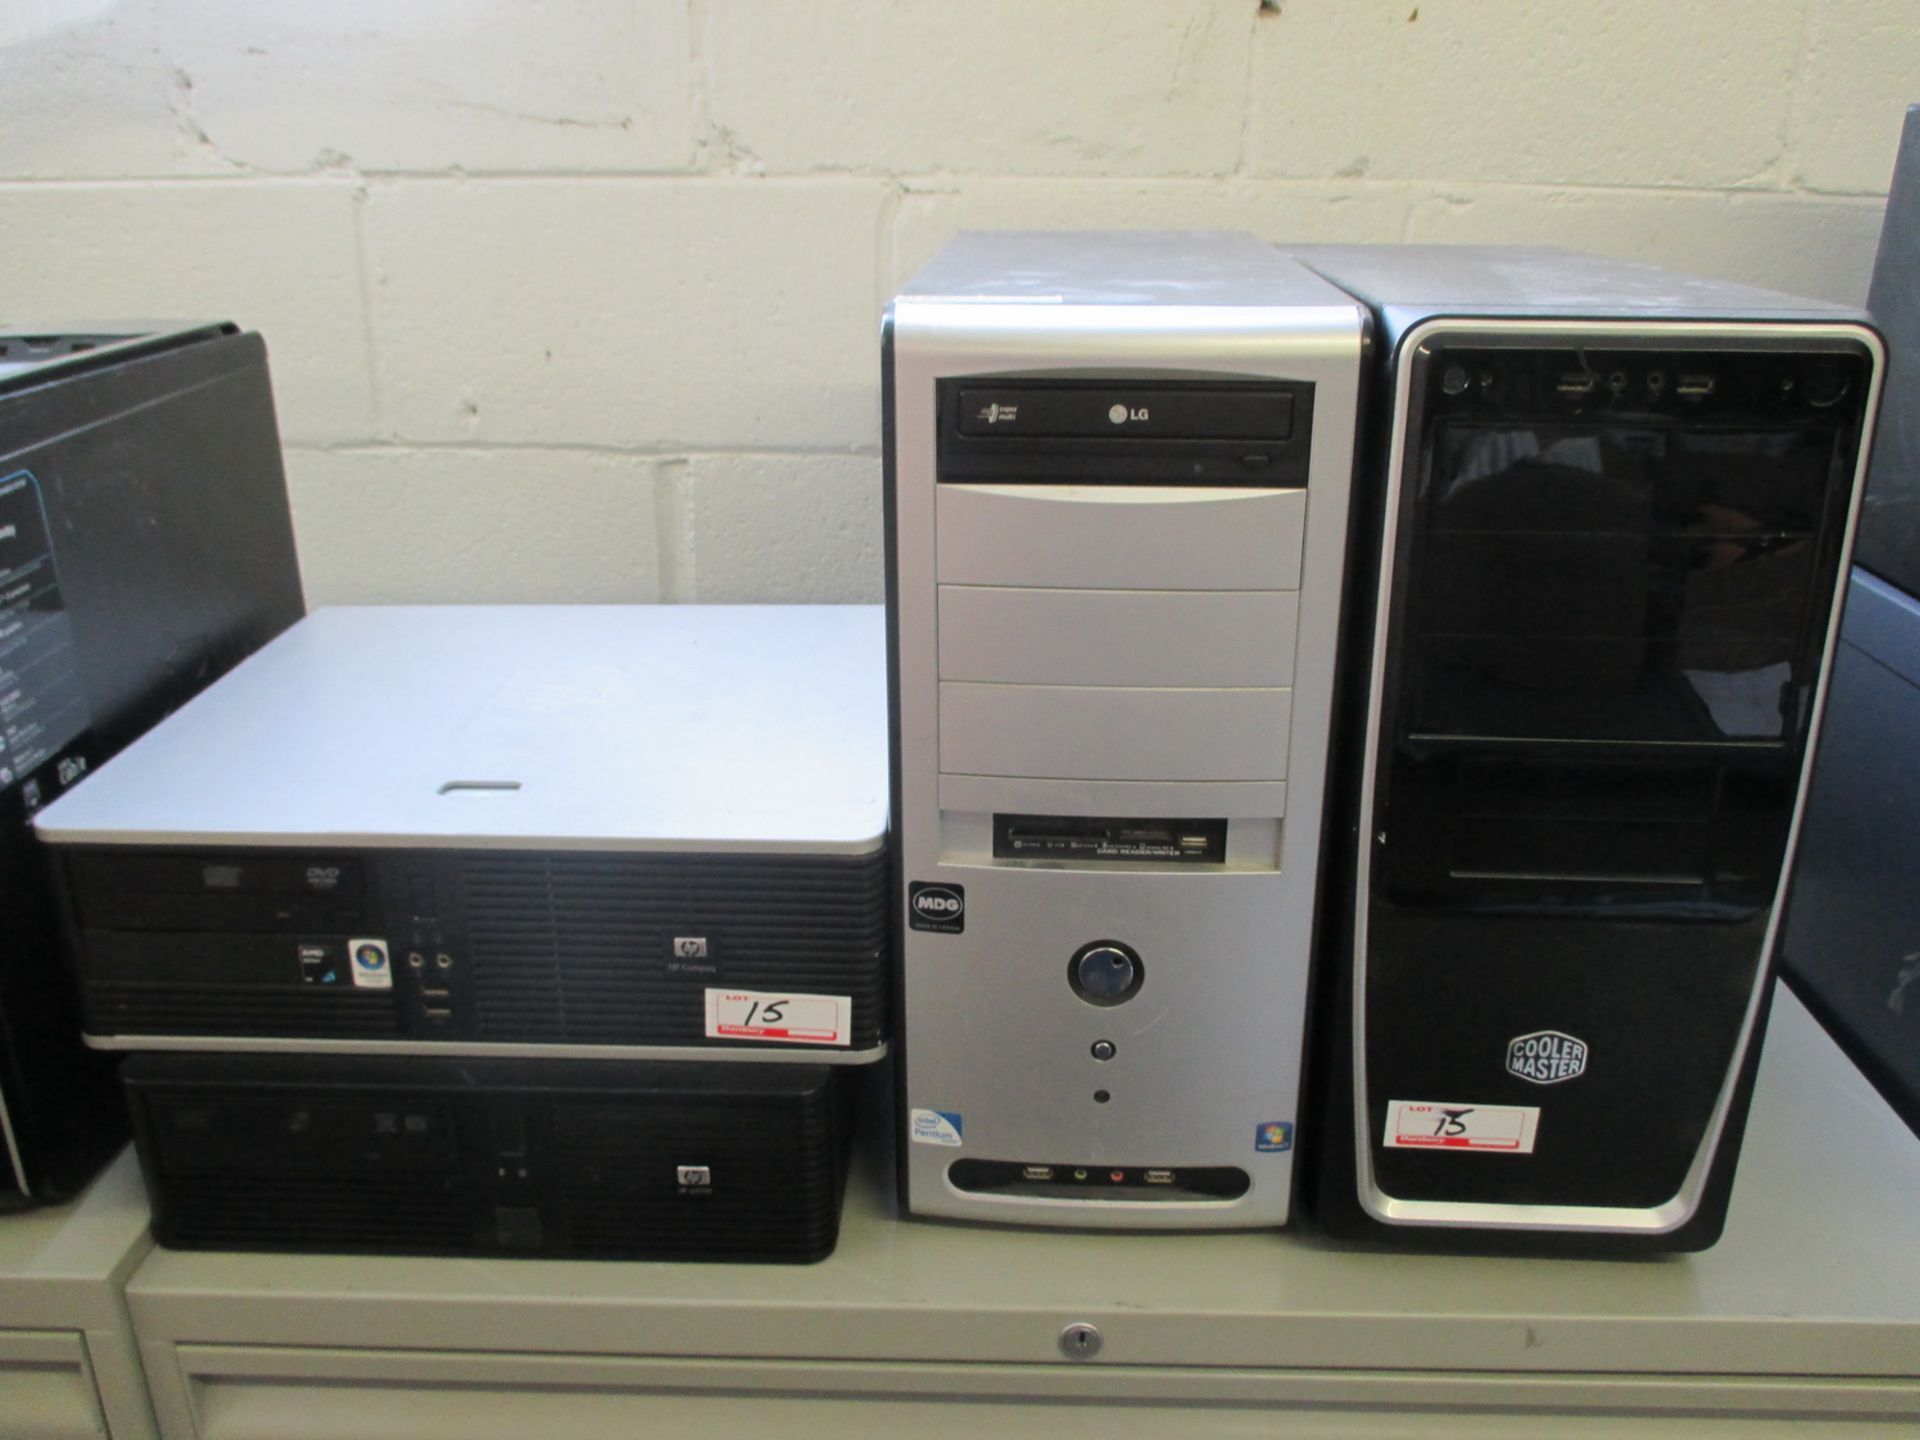 LOT OF 4 - ASSORTED DESKTOP COMPUTERS - HP, COMPAQ, RP5700 & COOLMASTER (NO HDD)